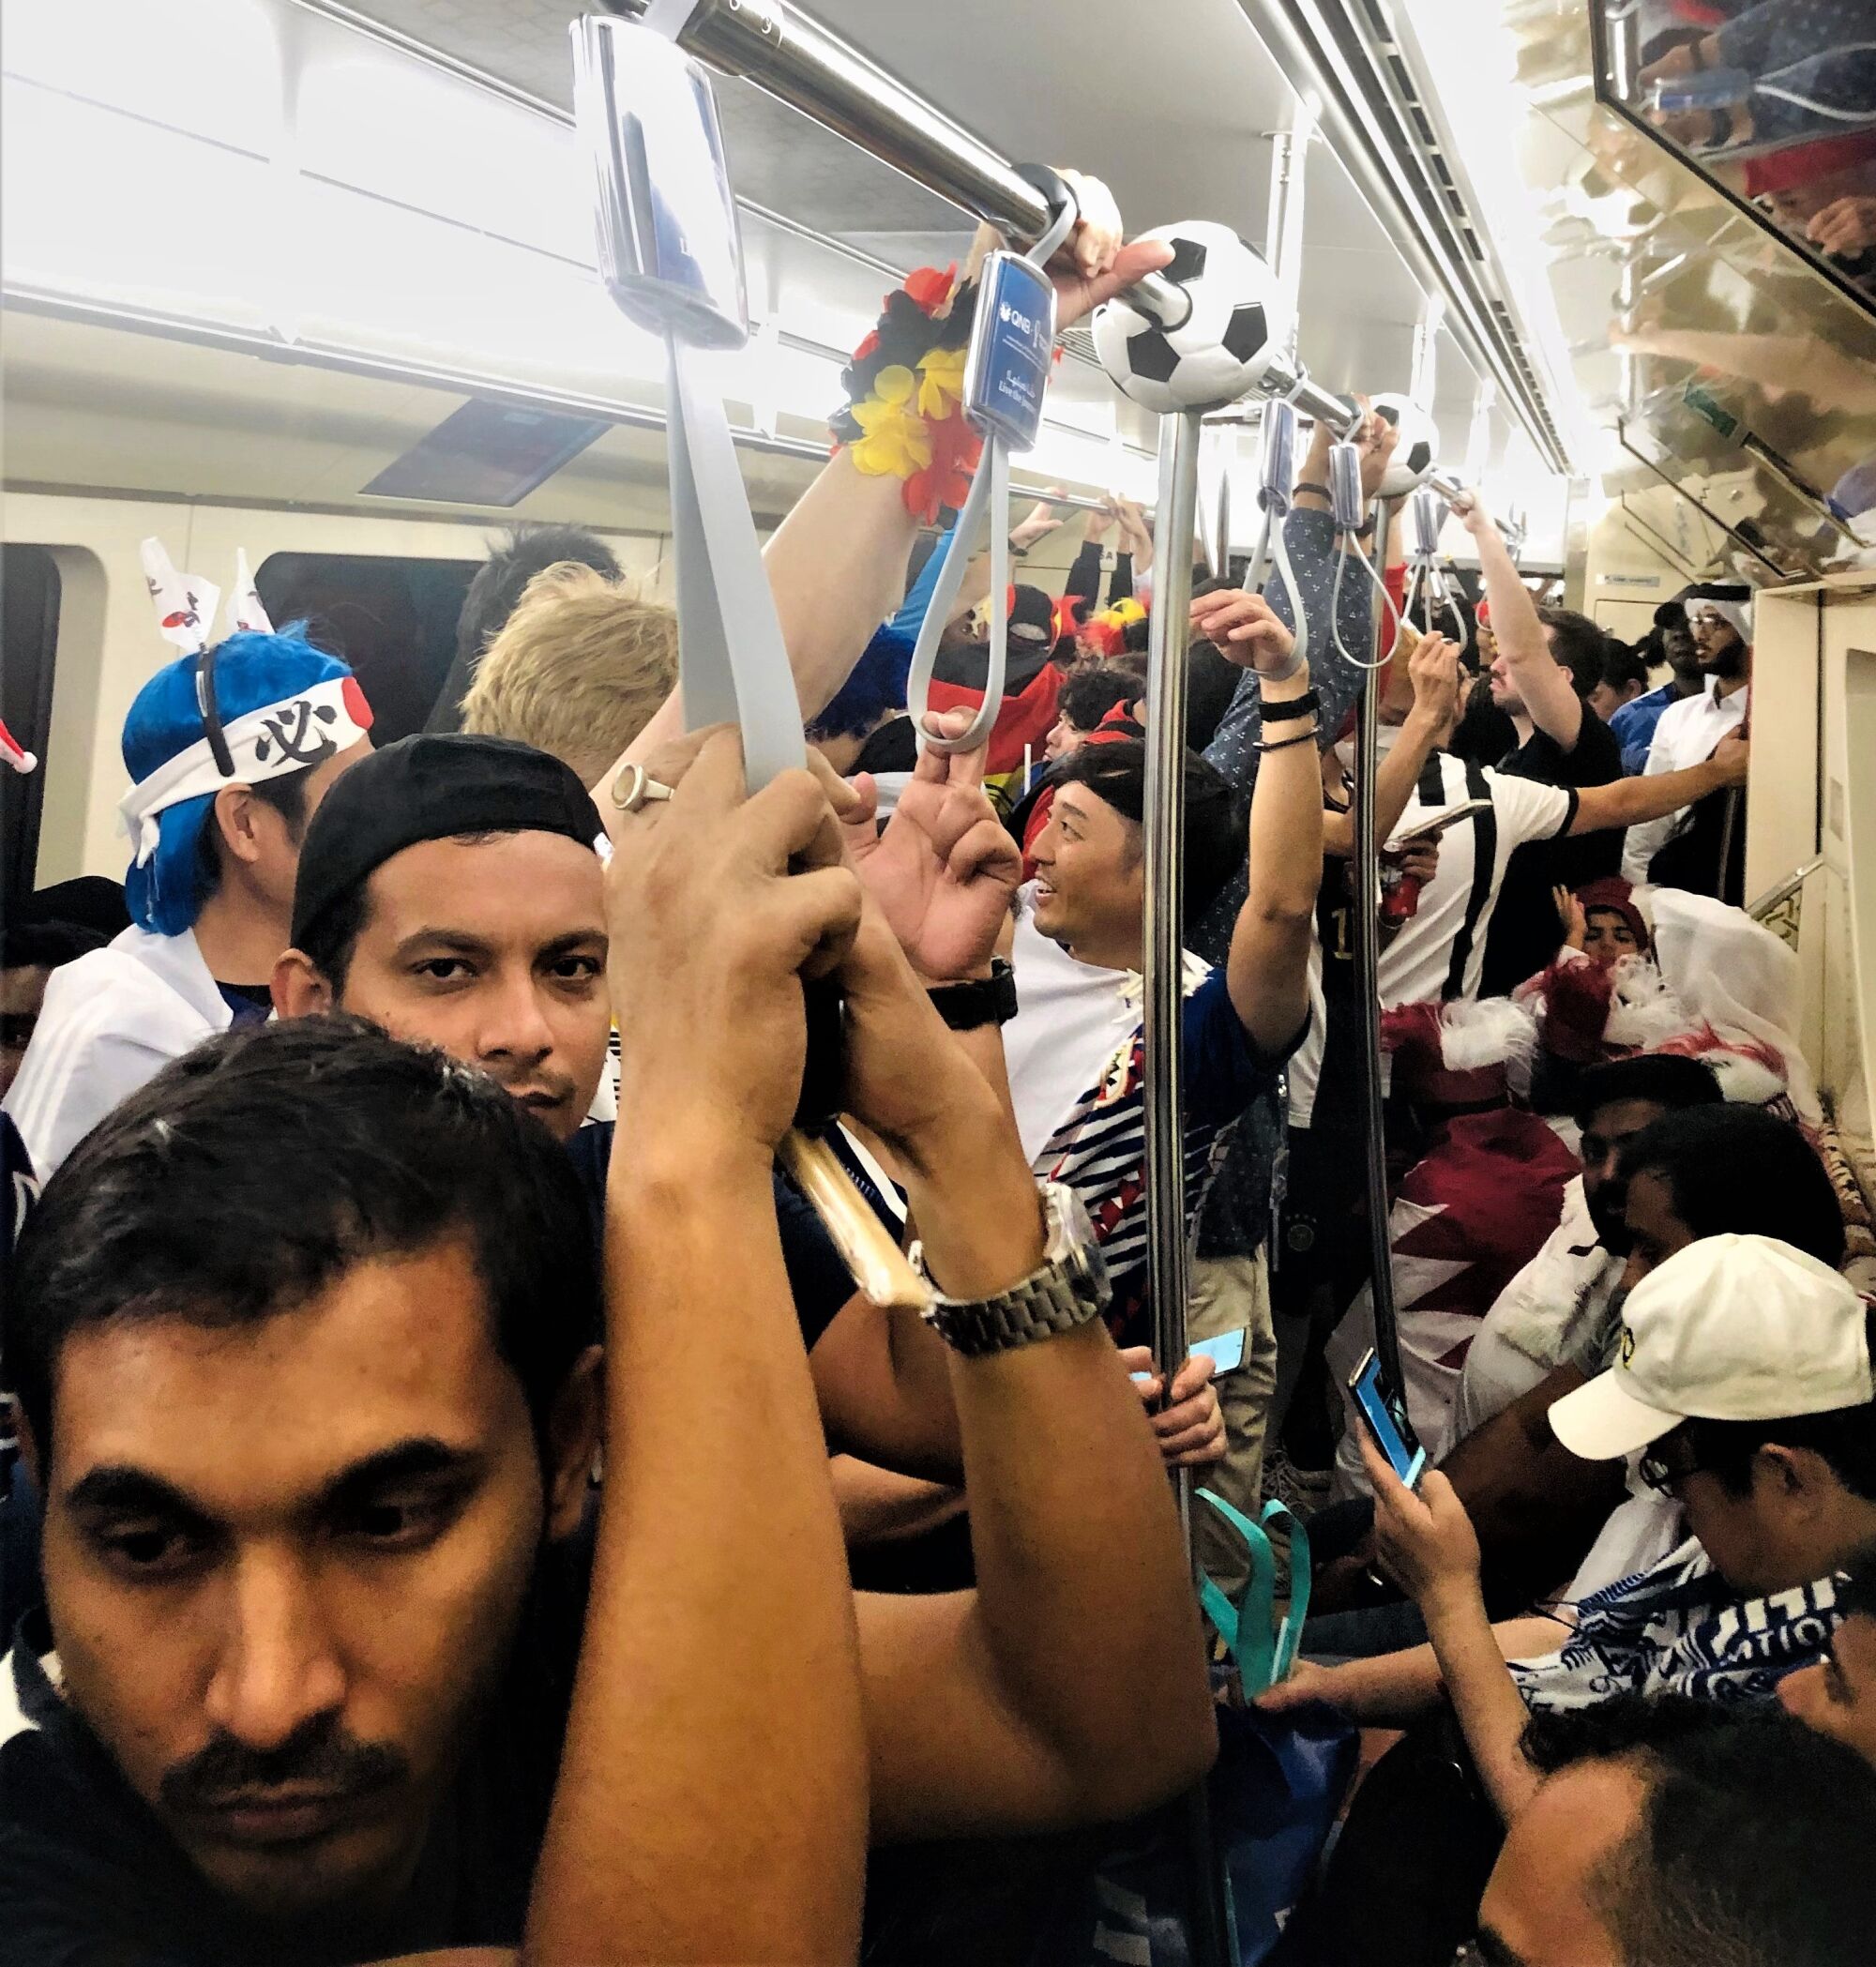 World Cup fans stood in a crowded subway train in Qatar on Wednesday.